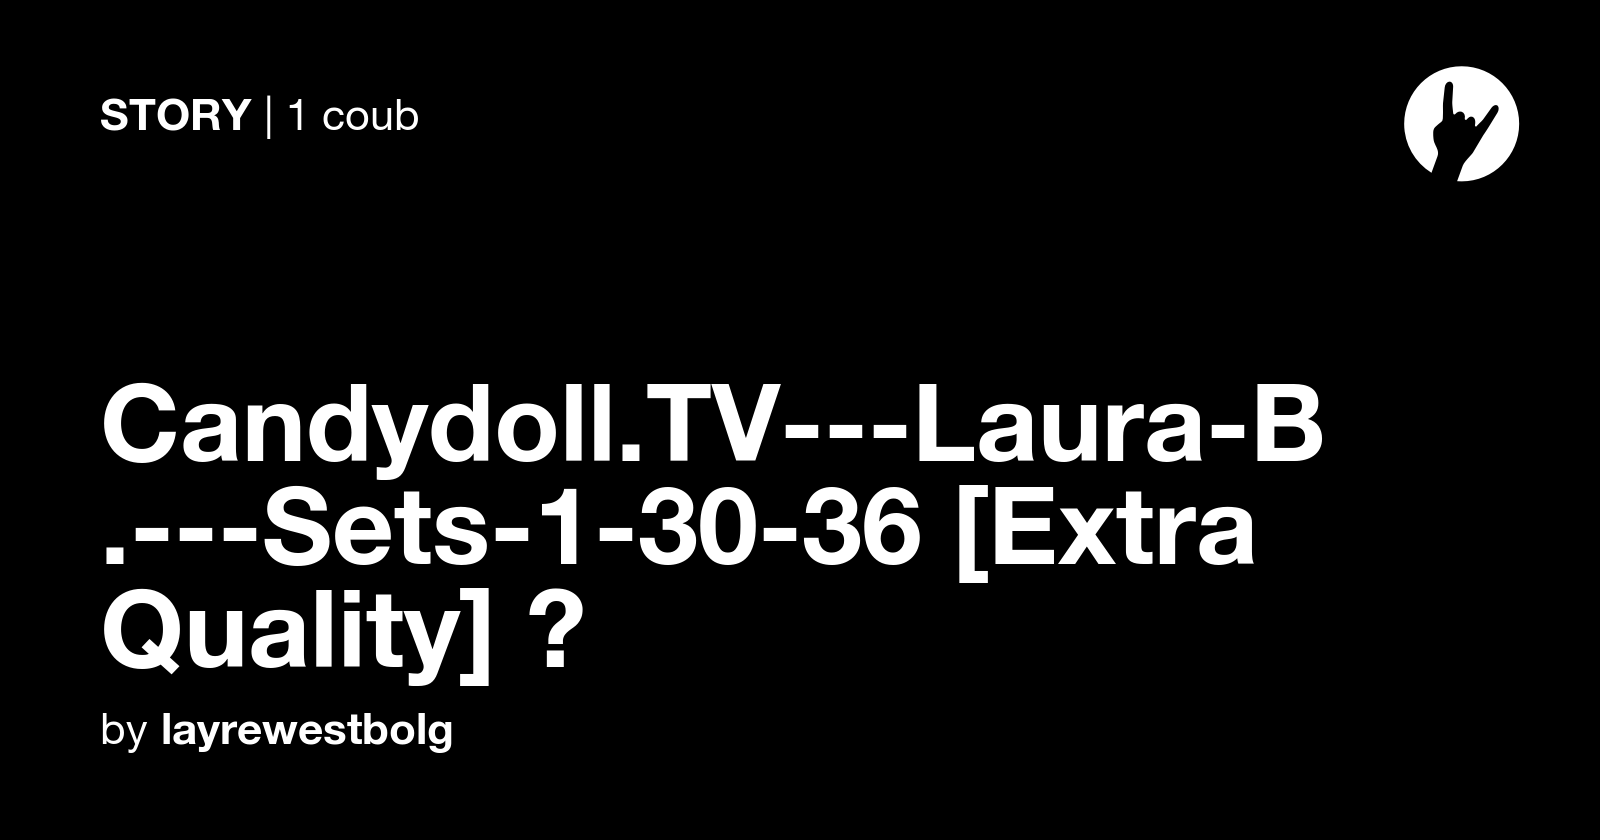 Candydoll.TV---Laura-B.---Sets-1-30-36 [Extra Quality] 💕 - Coub-> 